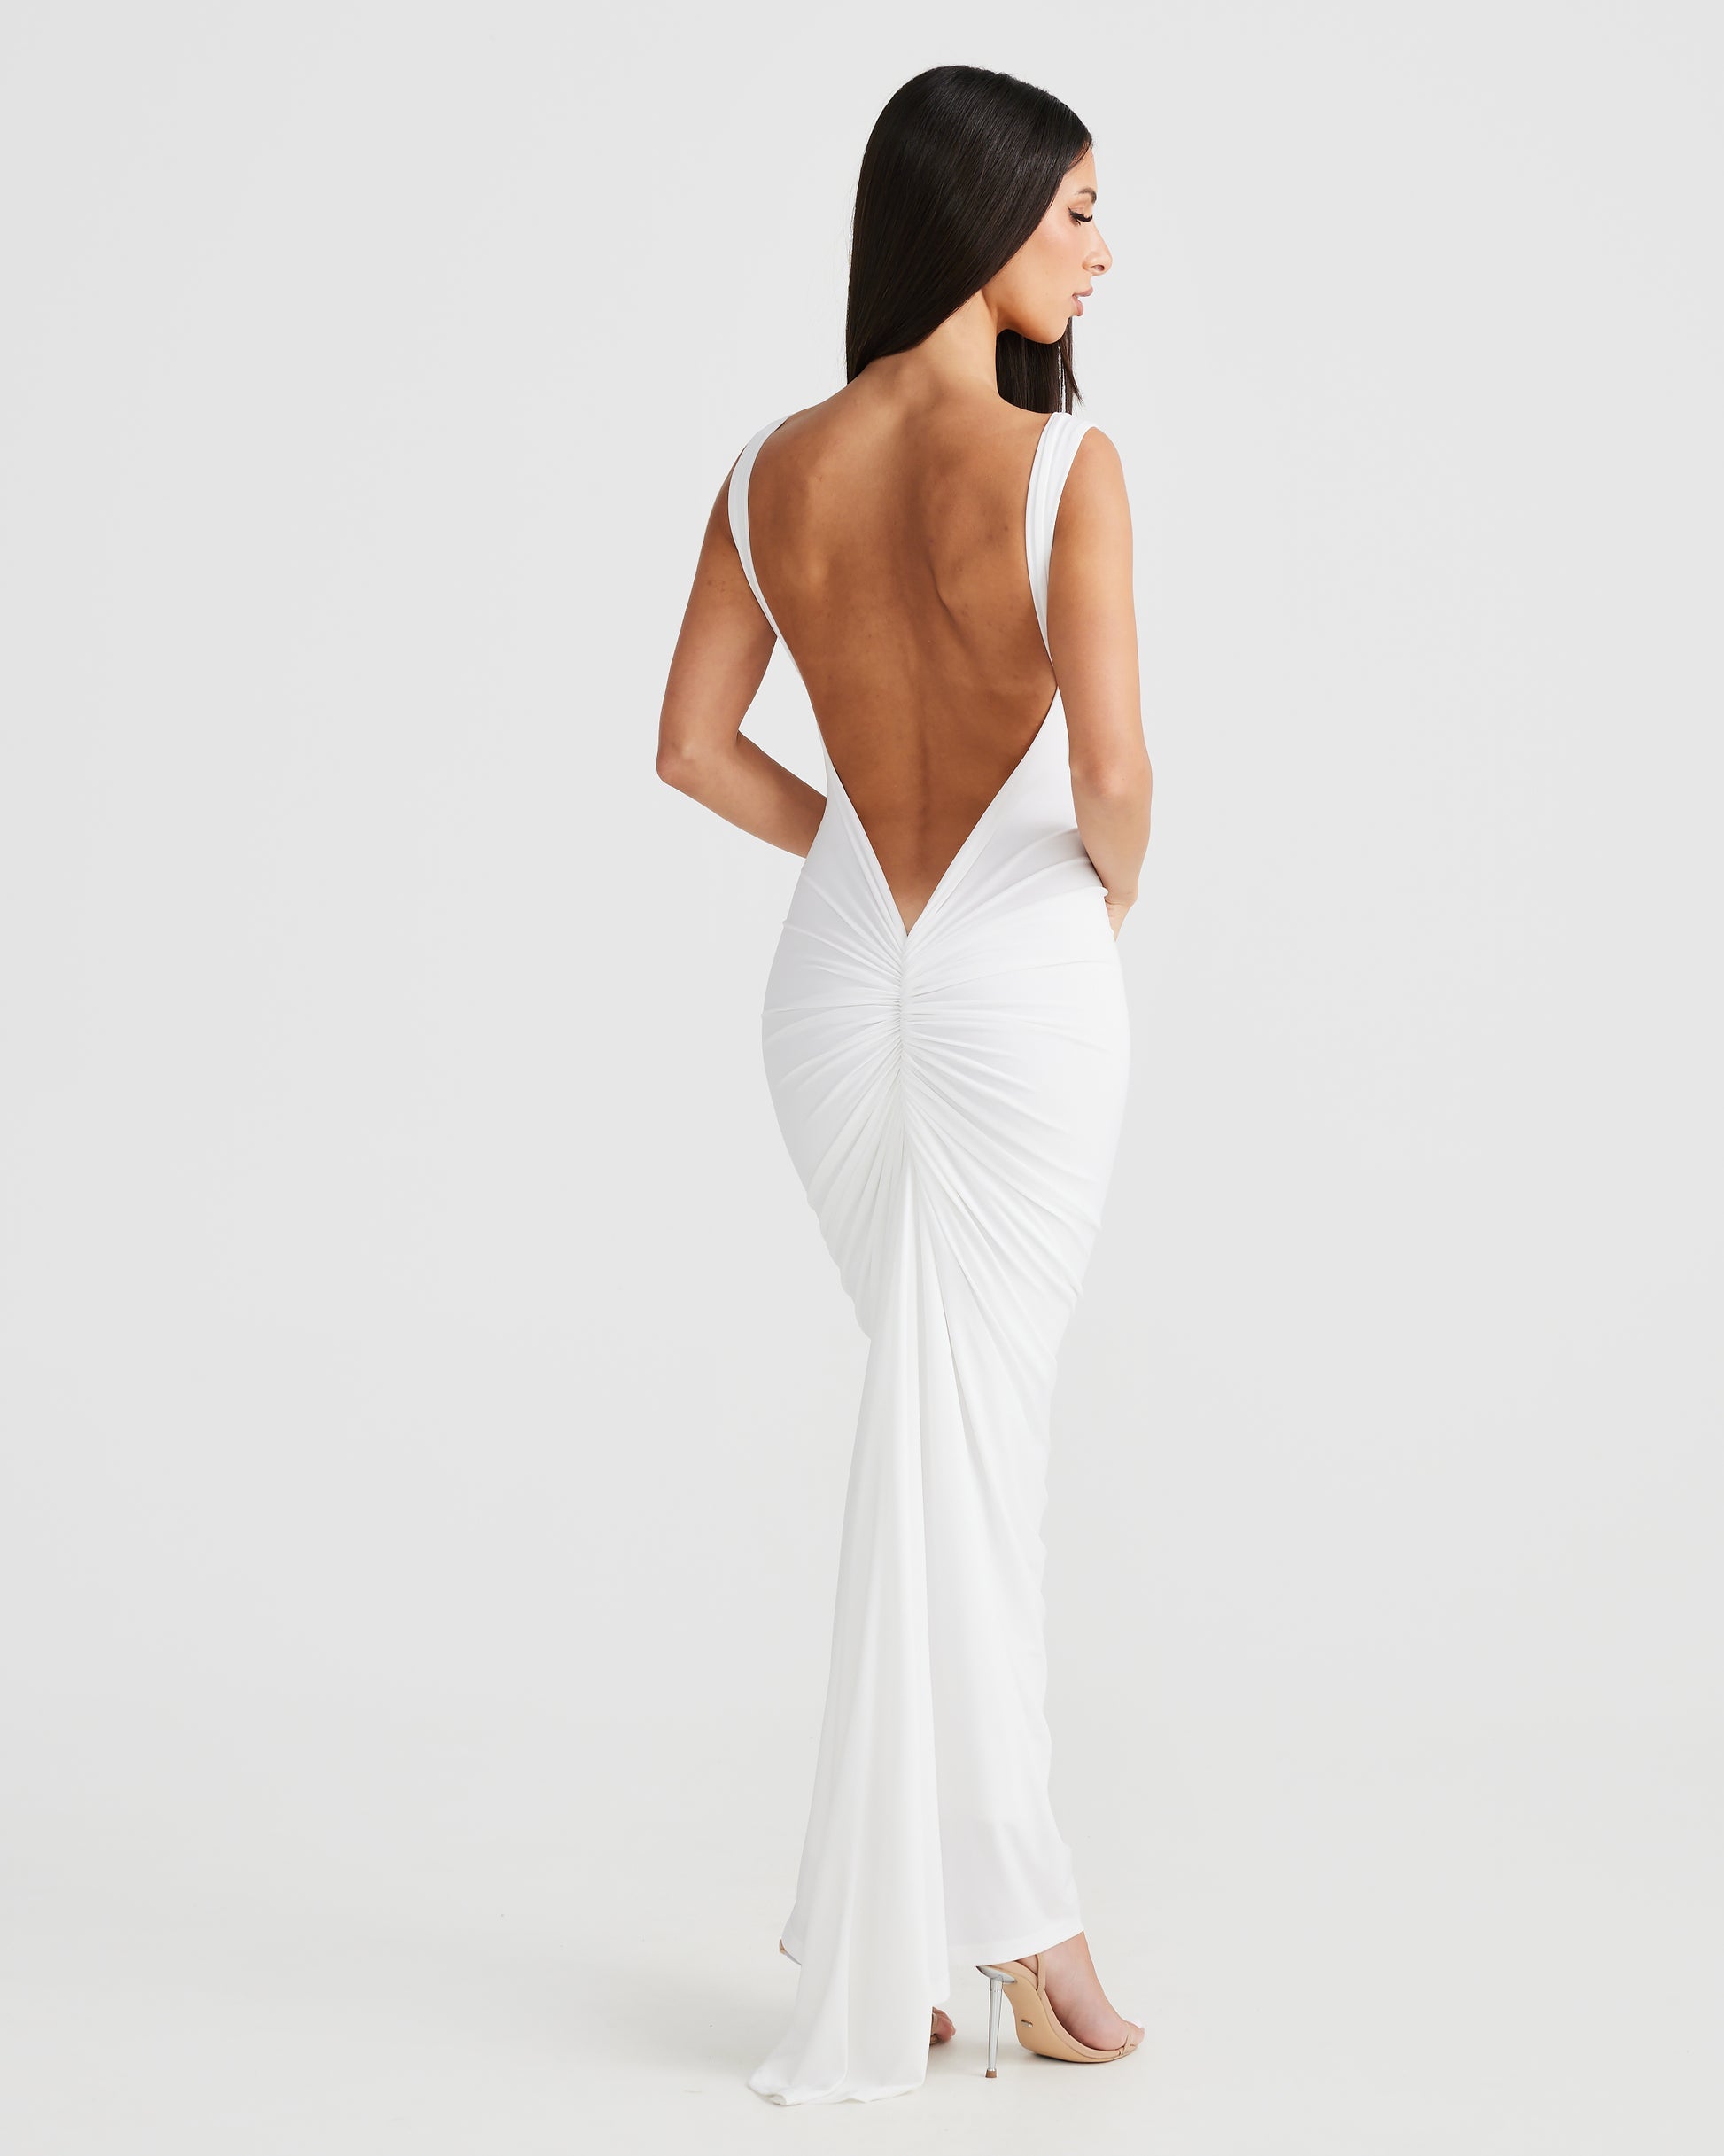 MÉLANI The Label SABIA White Ruched Bum Backless Dress